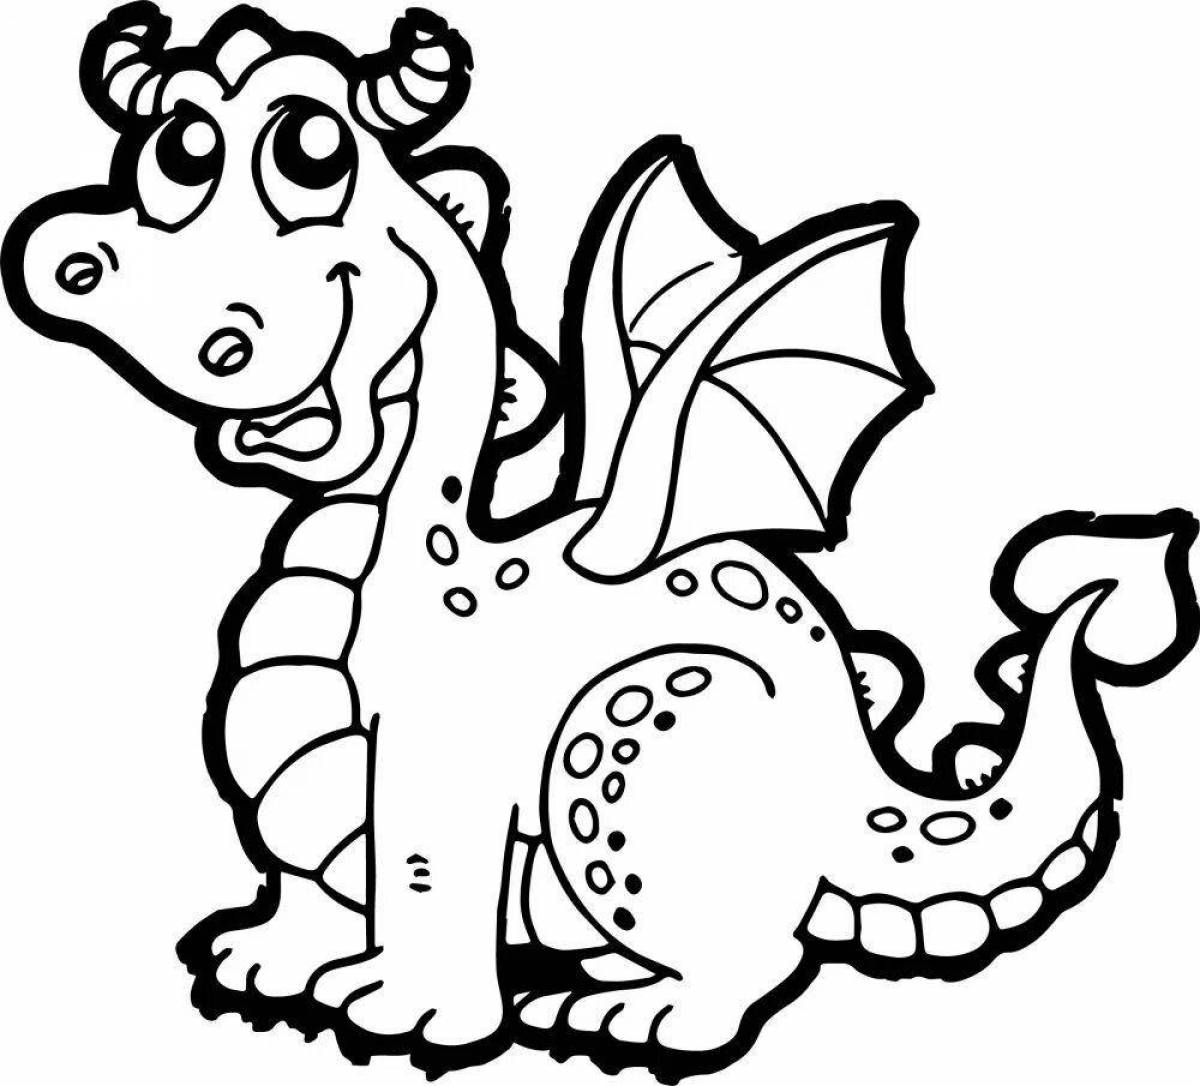 Colourful dragon coloring book for children